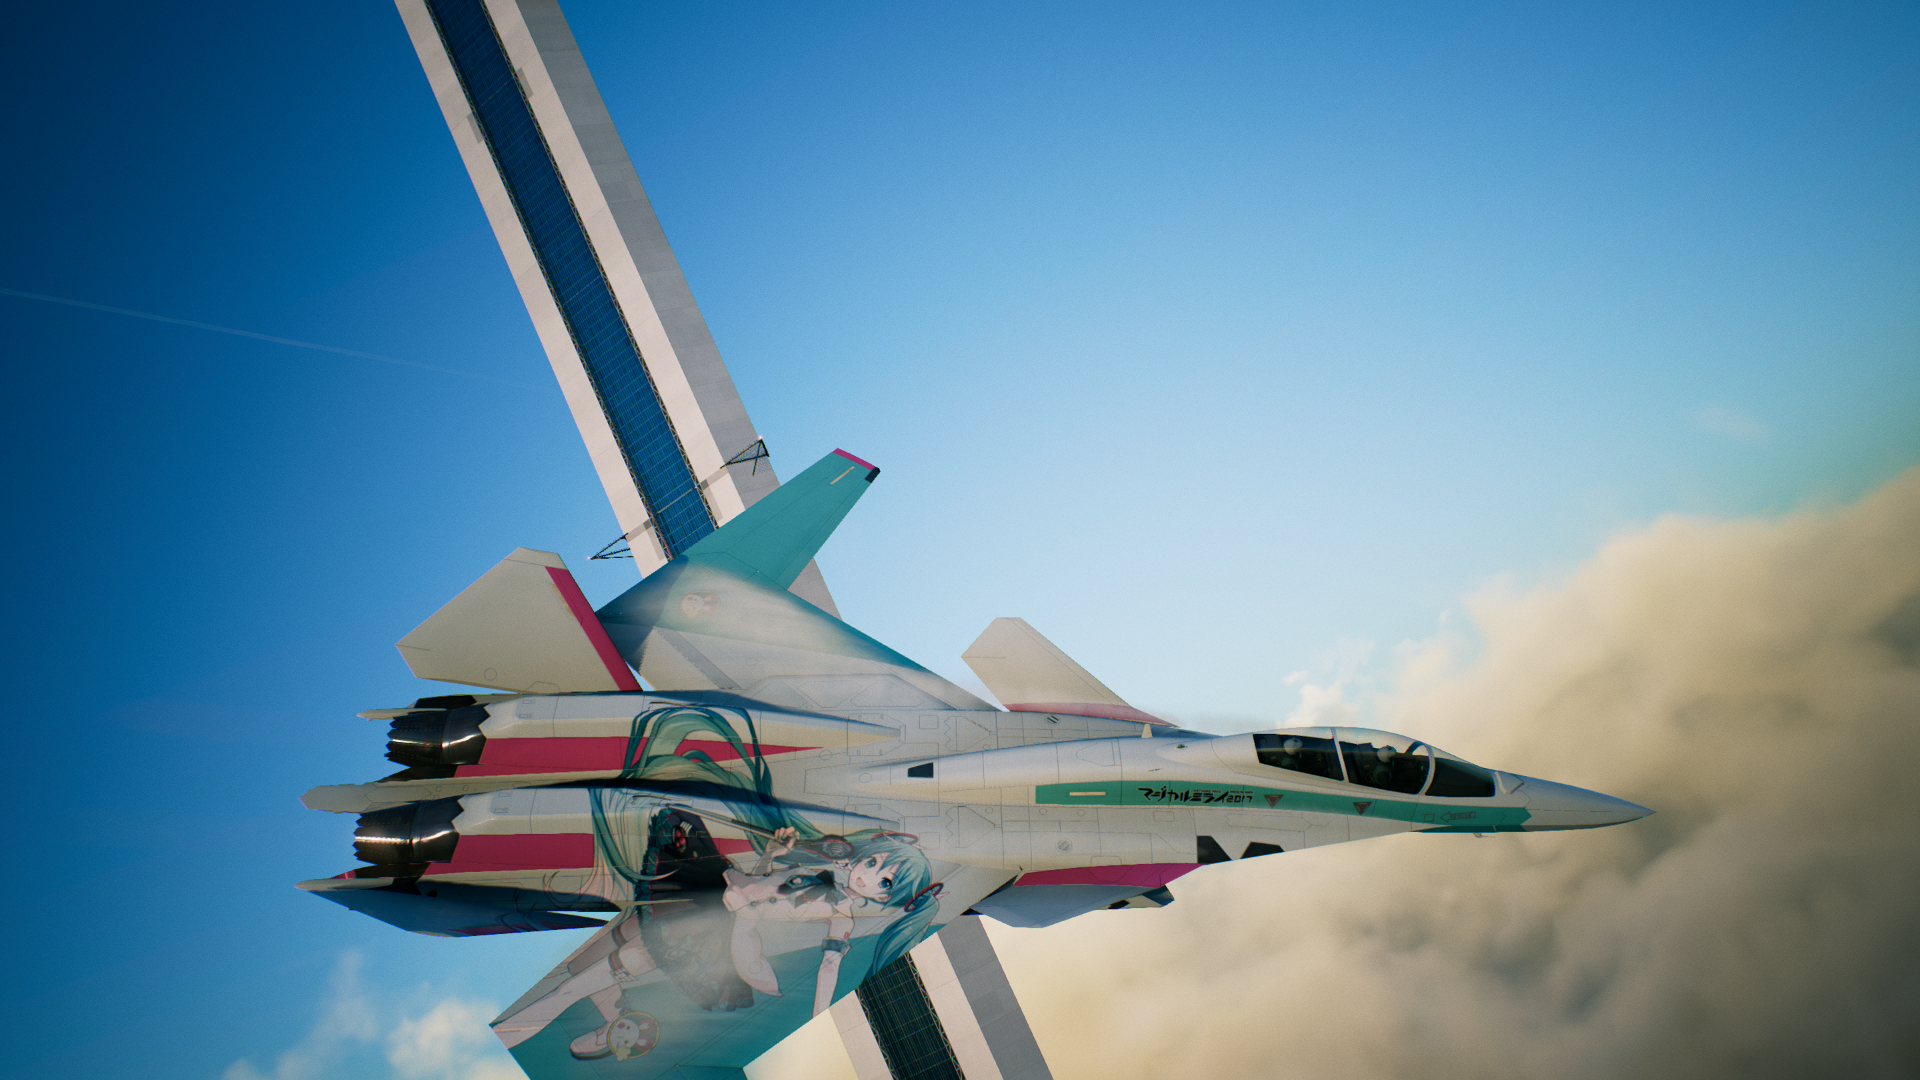 Aces on Ducks at Ace Combat 7: Skies Unknown Nexus - Mods and community 